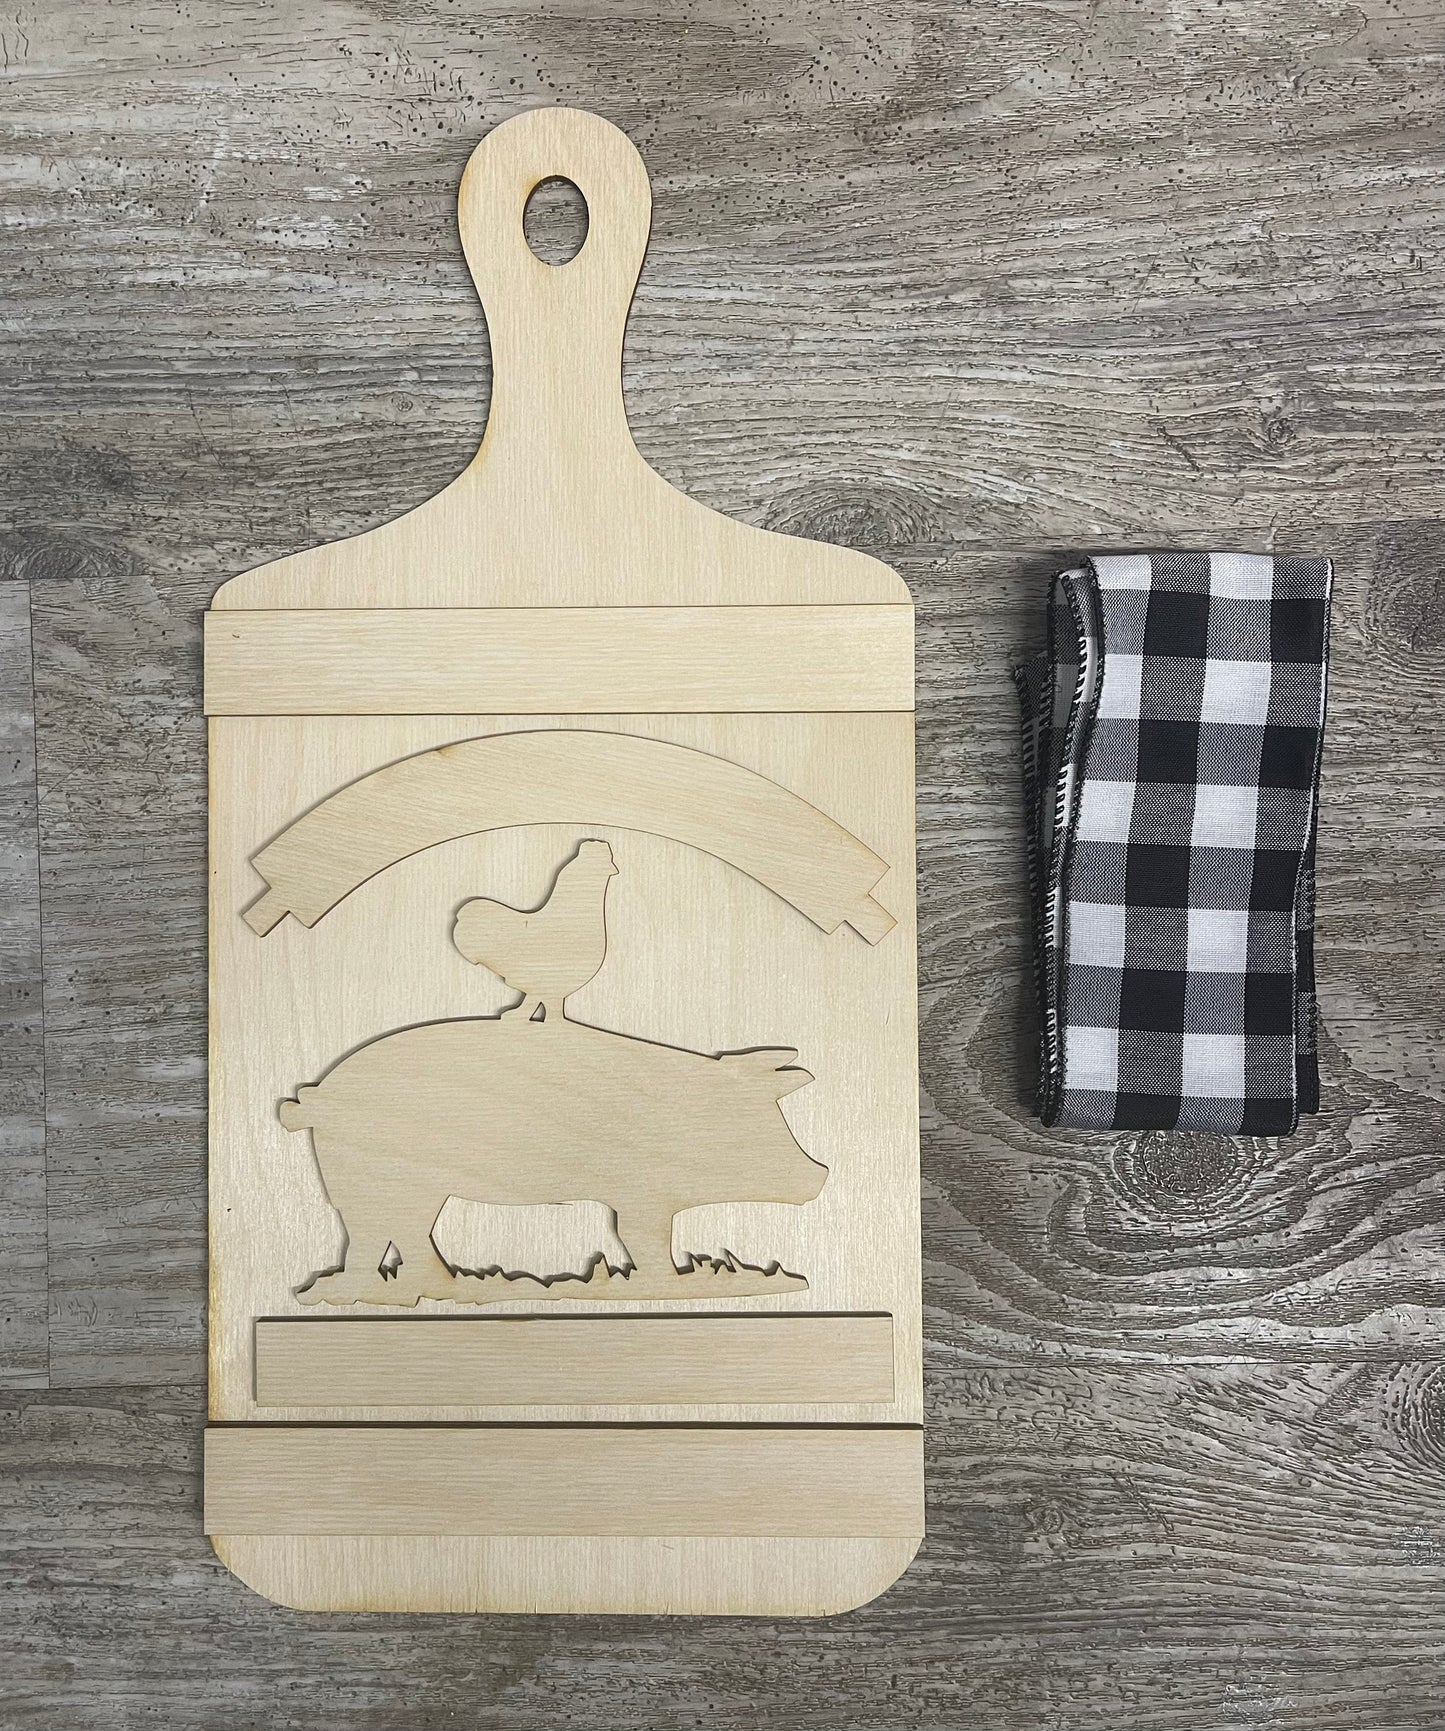 Large Farm Fresh Cutting Boards with cutouts and Ribbon unfinished wood cutouts ready for you to paint